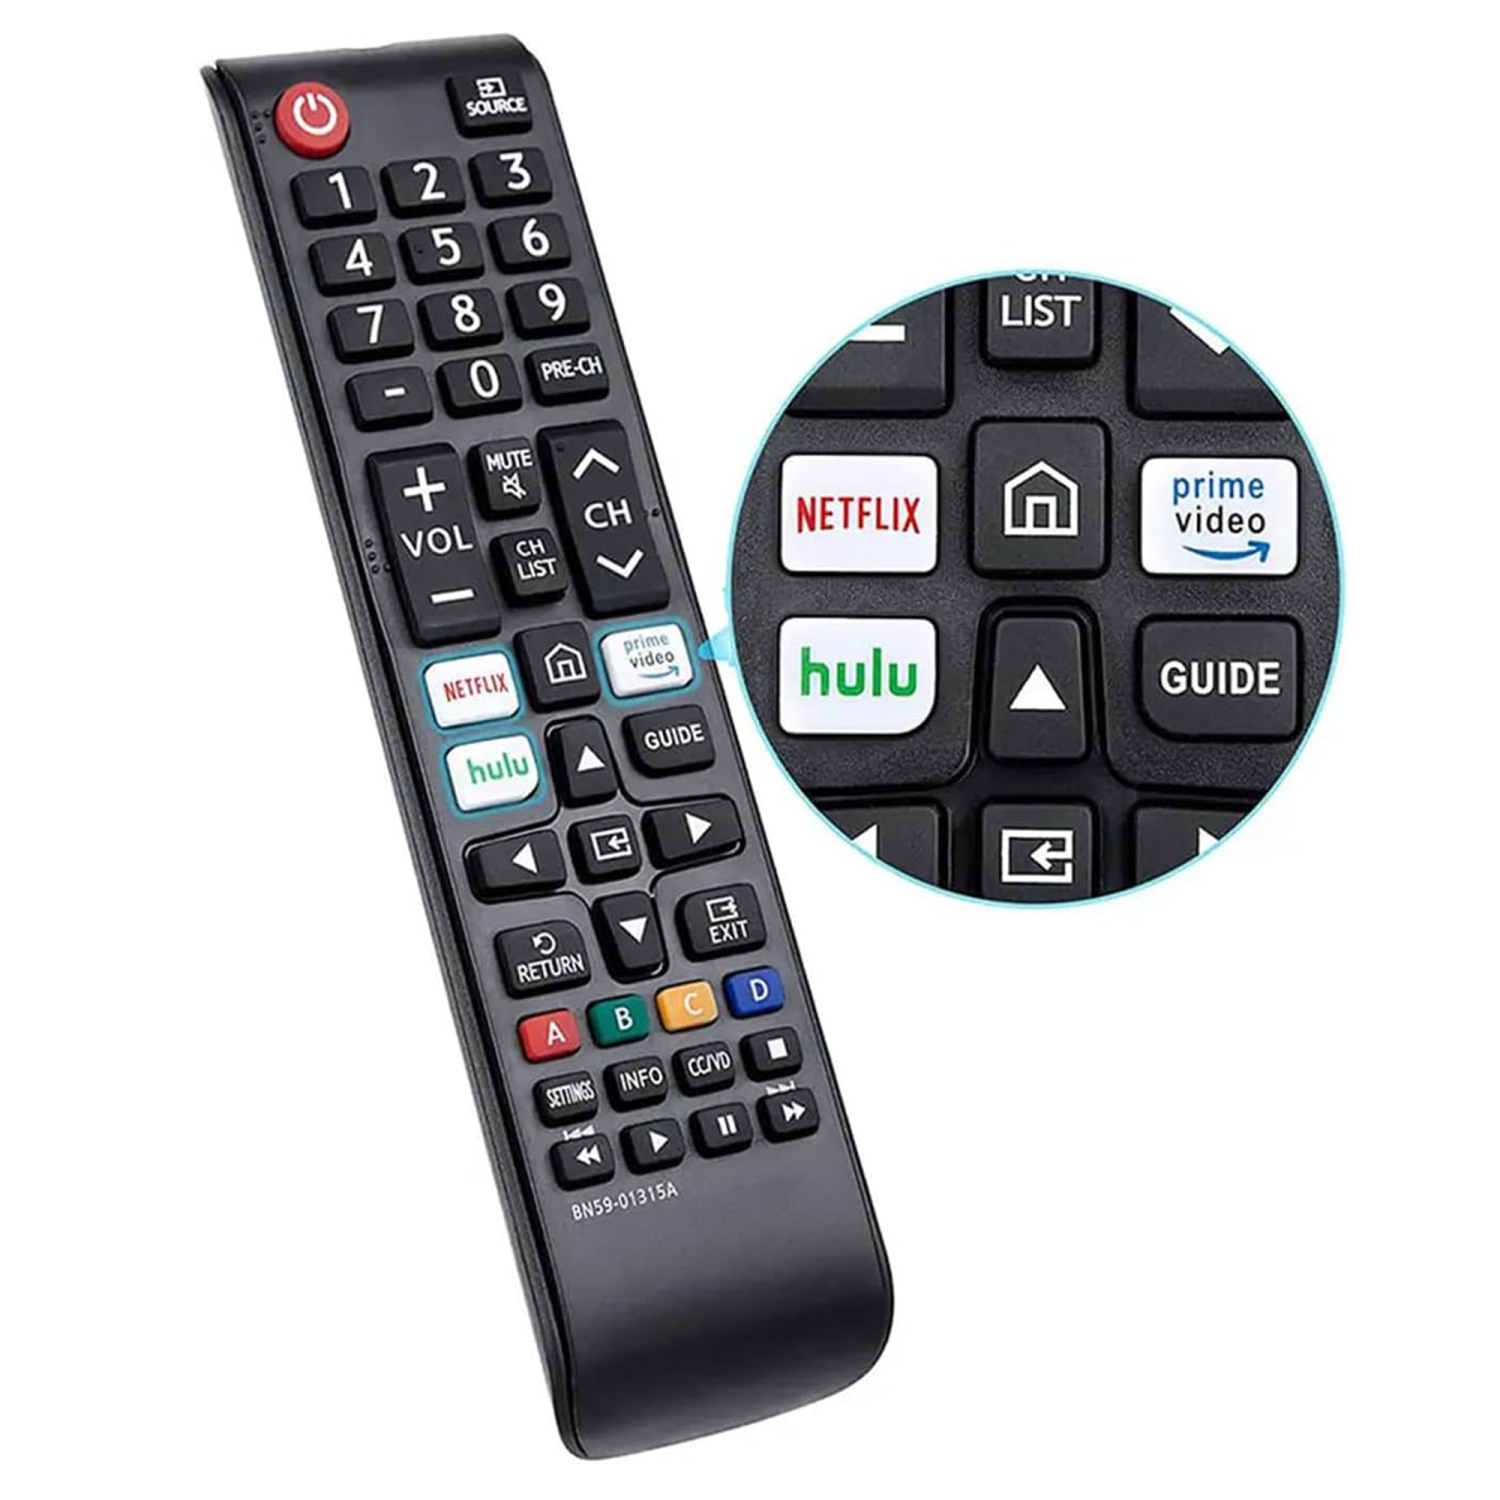 BN59-01315A BN59-01315D Remote Control Replacement for All Samsung LED QLED LCD 6/7/8/9 Series 4K UHD HDTV HDR Flat Curved Smart TV,N/NU/RU Series,with Netflix, Prime Video